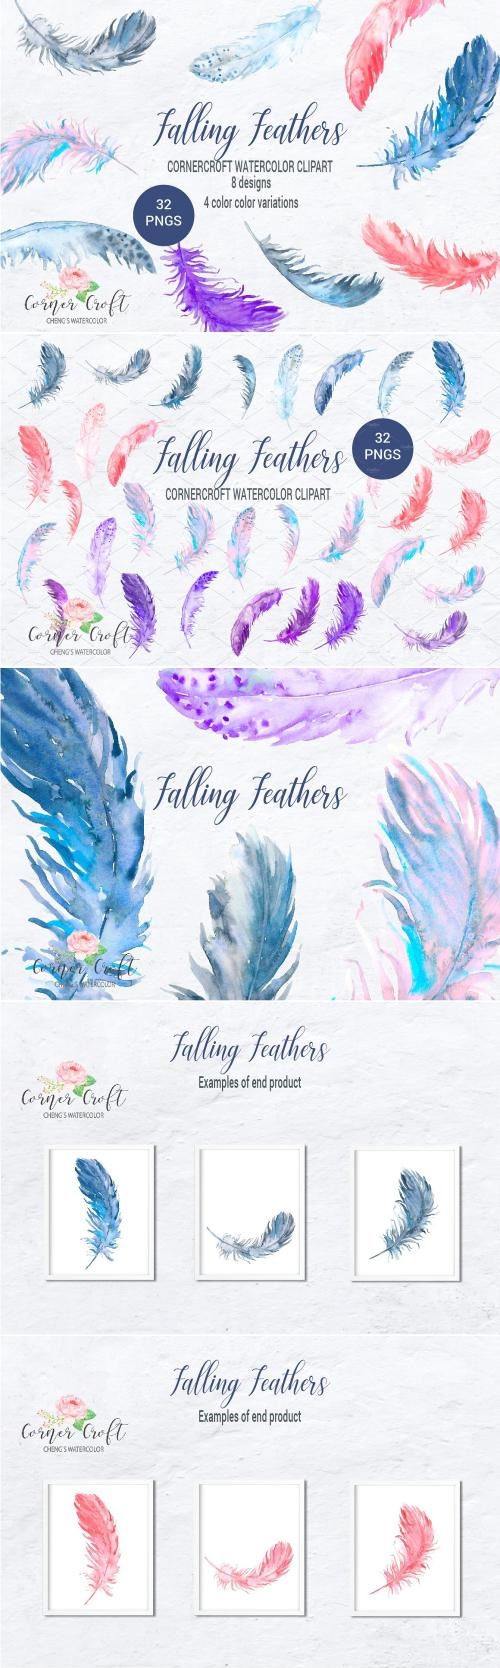 Watercolor Clipart Falling Feathers - 2178814